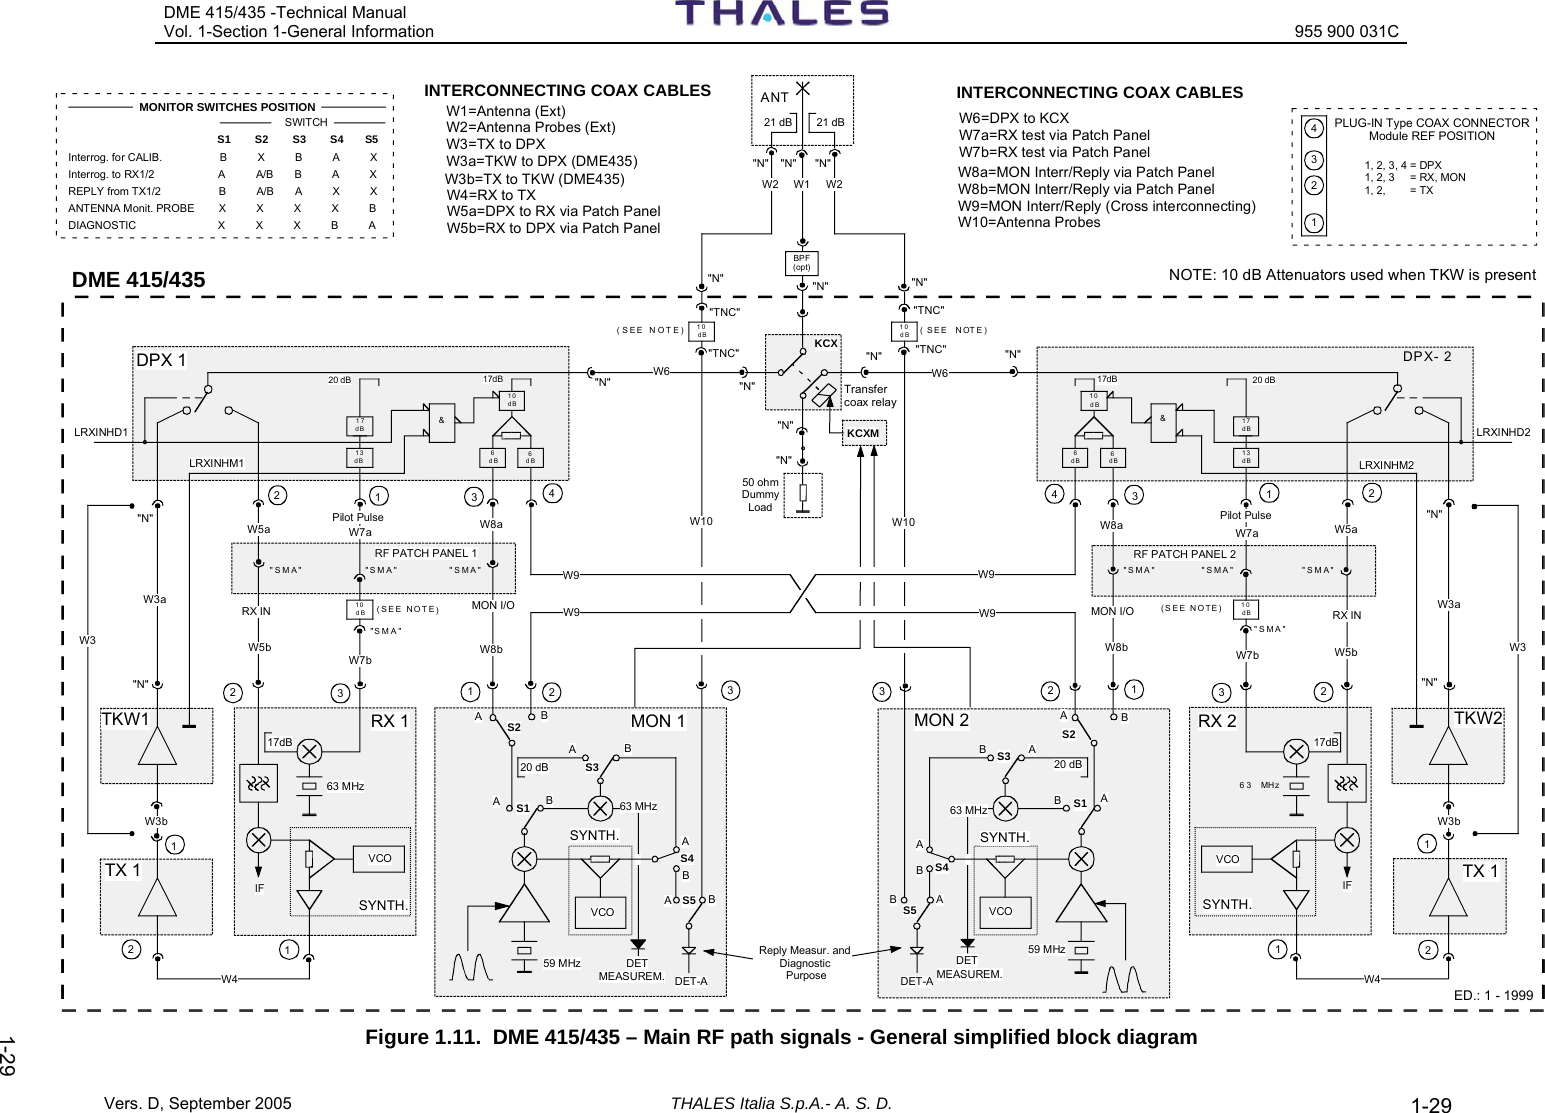 DME 415/435 -Technical Manual Vol. 1-Section 1-General Information  955 900 031C Vers. D, September 2005 THALES Italia S.p.A.- A. S. D. 1-29   1-29 63 MHzDPX- 2  ABBAABABS2AAAB   &amp;&amp;10dB10dBdBdBdBdBdB dB6666dB dB1713 131710dB10dB10dB(SEE NOTE) ( SEE NOTE) 11232344(SEE NOTE)ANT10dB(SEE NOTE)&quot;SMA&quot;&quot;SMA&quot; &quot;SMA&quot; &quot;SMA&quot; &quot;SMA&quot;&quot;SMA&quot; MONITOR SWITCHES POSITION SWITCHInterrog. for CALIB.                   B          X          B          A          X   Interrog. to RX1/2                     A          A/B       B          A          X REPLY from TX1/2                   B          A/B       A          X          XANTENNA Monit. PROBE        X          X          X          X          BDIAGNOSTIC                           X          X          X          B          AS1        S2        S3        S4       S5PLUG-IN Type COAX CONNECTOR Module REF POSITION43211, 2, 3, 4 = DPX1, 2, 3     = RX, MON1, 2,        = TX 21 dB 21 dBKCX50 ohmDummyLoad3232132321RF PATCH PANEL 1Pilot PulseMON I/ORX IN63 MHz17dBRX 1TKW1SYNTH.VCOTX 1IF59 MHzVCOSYNTH.S2S1S3S5S4DETDET-AABBABAABBADET-ADET59 MHzVCOSYNTH.BAAAABBBAS2S3S1S4S5MON 1 MON 220 dB 20 dBBRX 2 TKW217dBVCOSYNTH.TX 1IF20 dB 17dBDPX 1LRXINHD1LRXINHM1LRXINHD2LRXINHM2MON I/O RX INPilot PulseRF PATCH PANEL 217dB 20 dB21112NOTE: 10 dB Attenuators used when TKW is present DME 415/4351KCXMTransfer coax relayReply Measur. andDiagnostic  PurposeMEASUREM. MEASUREM.63 MHz 63 MHz&quot;N&quot; &quot;N&quot; &quot;N&quot;W1 W2W2&quot;N&quot; &quot;N&quot; &quot;N&quot;&quot;TNC&quot;&quot;TNC&quot;&quot;TNC&quot;&quot;TNC&quot;&quot;N&quot;&quot;N&quot;&quot;N&quot;&quot;N&quot;W6&quot;N&quot;W6&quot;N&quot;&quot;SM A &quot;W8bW7bW5bW5a W7a W8aW9W9W3aW3bW3W4W9W9W10W10 W8a W7a W5aW7bW8b W5b&quot;SMA&quot;W3W3aW4W3b&quot;N&quot;&quot;N&quot;&quot;N&quot;&quot;N&quot;W1=Antenna (Ext)W2=Antenna Probes (Ext)W3=TX to DPXW3a=TKW to DPX (DME435)W6=DPX to KCXW7a=RX test via Patch PanelW7b=RX test via Patch PanelED.: 1 - 1999BPF(opt)W4=RX to TXW5a=DPX to RX via Patch PanelW5b=RX to DPX via Patch PanelINTERCONNECTING COAX CABLESW8a=MON Interr/Reply via Patch PanelW8b=MON Interr/Reply via Patch PanelW9=MON Interr/Reply (Cross interconnecting)W10=Antenna ProbesW3b=TX to TKW (DME435)INTERCONNECTING COAX CABLES Figure 1.11.  DME 415/435 – Main RF path signals - General simplified block diagram  